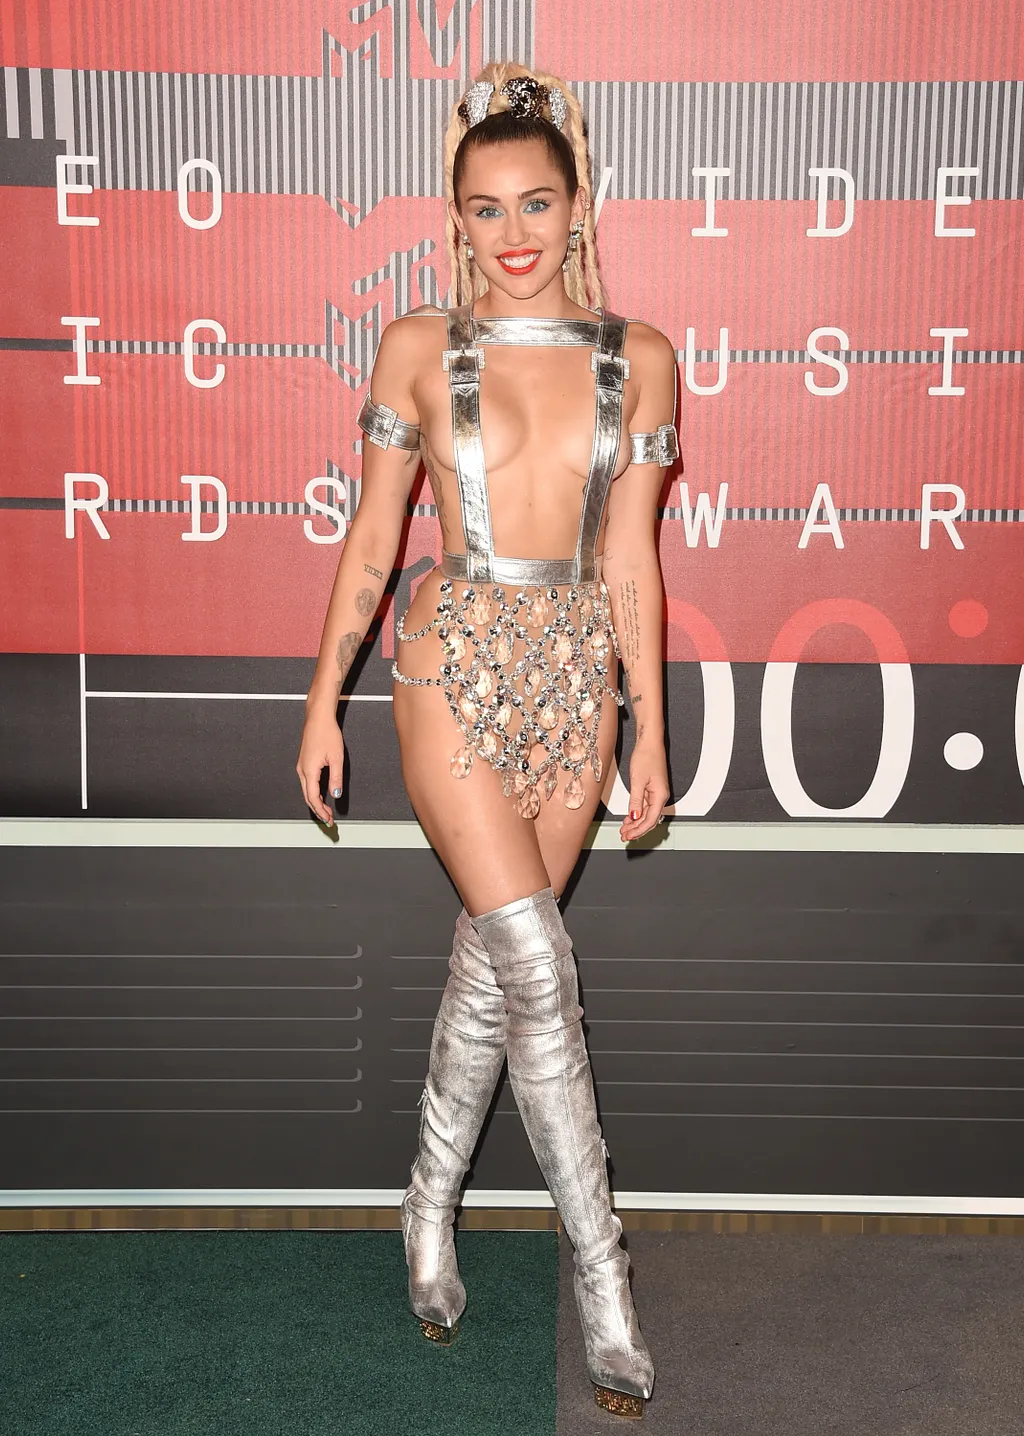 2015 MTV Video Music Awards - Arrivals GettyImageRank3 Custom People Clothing Suspenders Boot Jewelry VERTICAL Looking At Camera Full Length SMILING USA California City Of Los Angeles One Person MUSIC Thigh High Boot Award Silver Colored Photography Strap